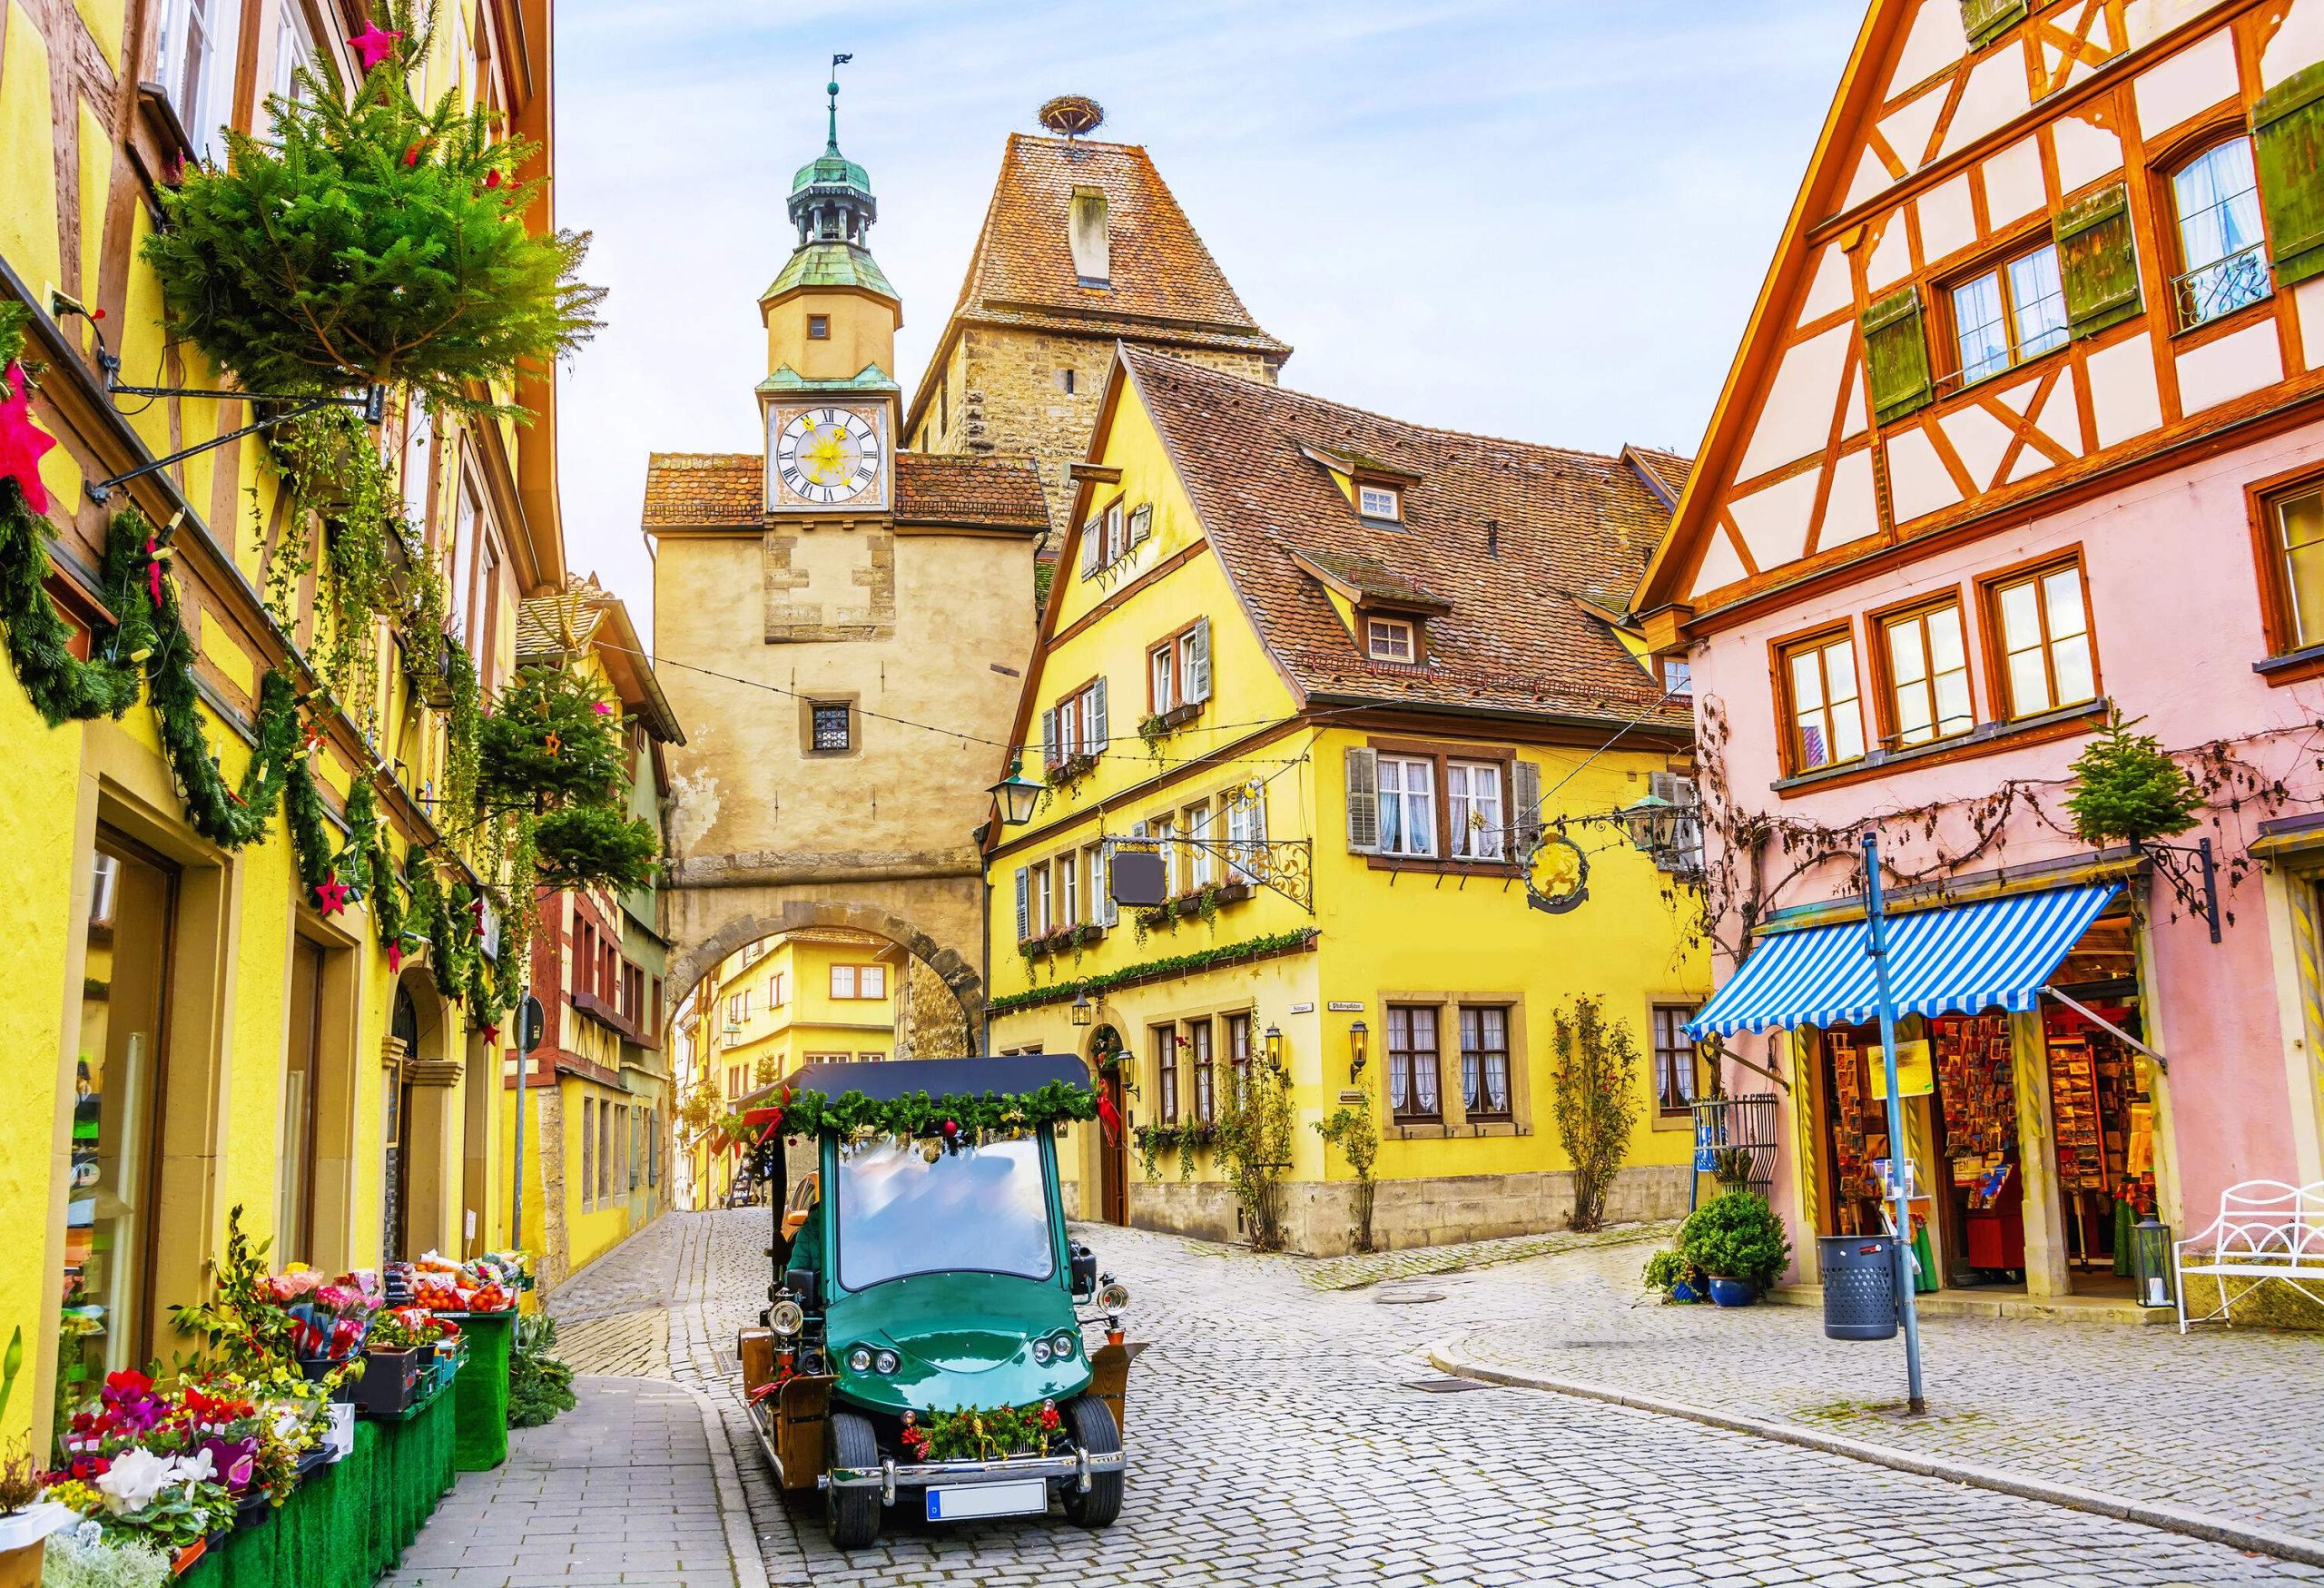 A quaint town with vibrant half-timbered buildings and a green golf cart decorated with garlands parked on the side of a paved street.